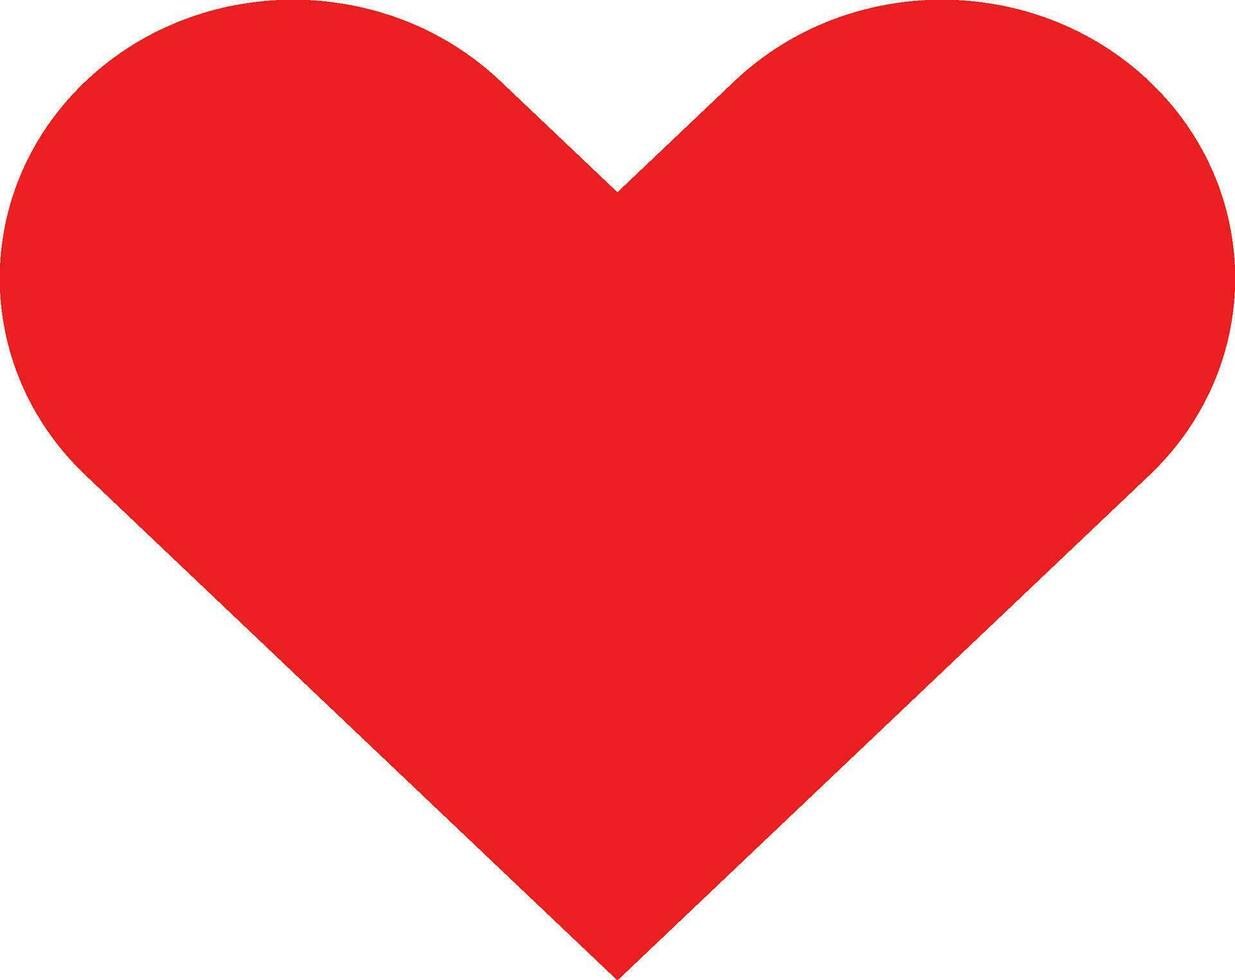 red heart isolated on white, red heart icon, heart icon vector